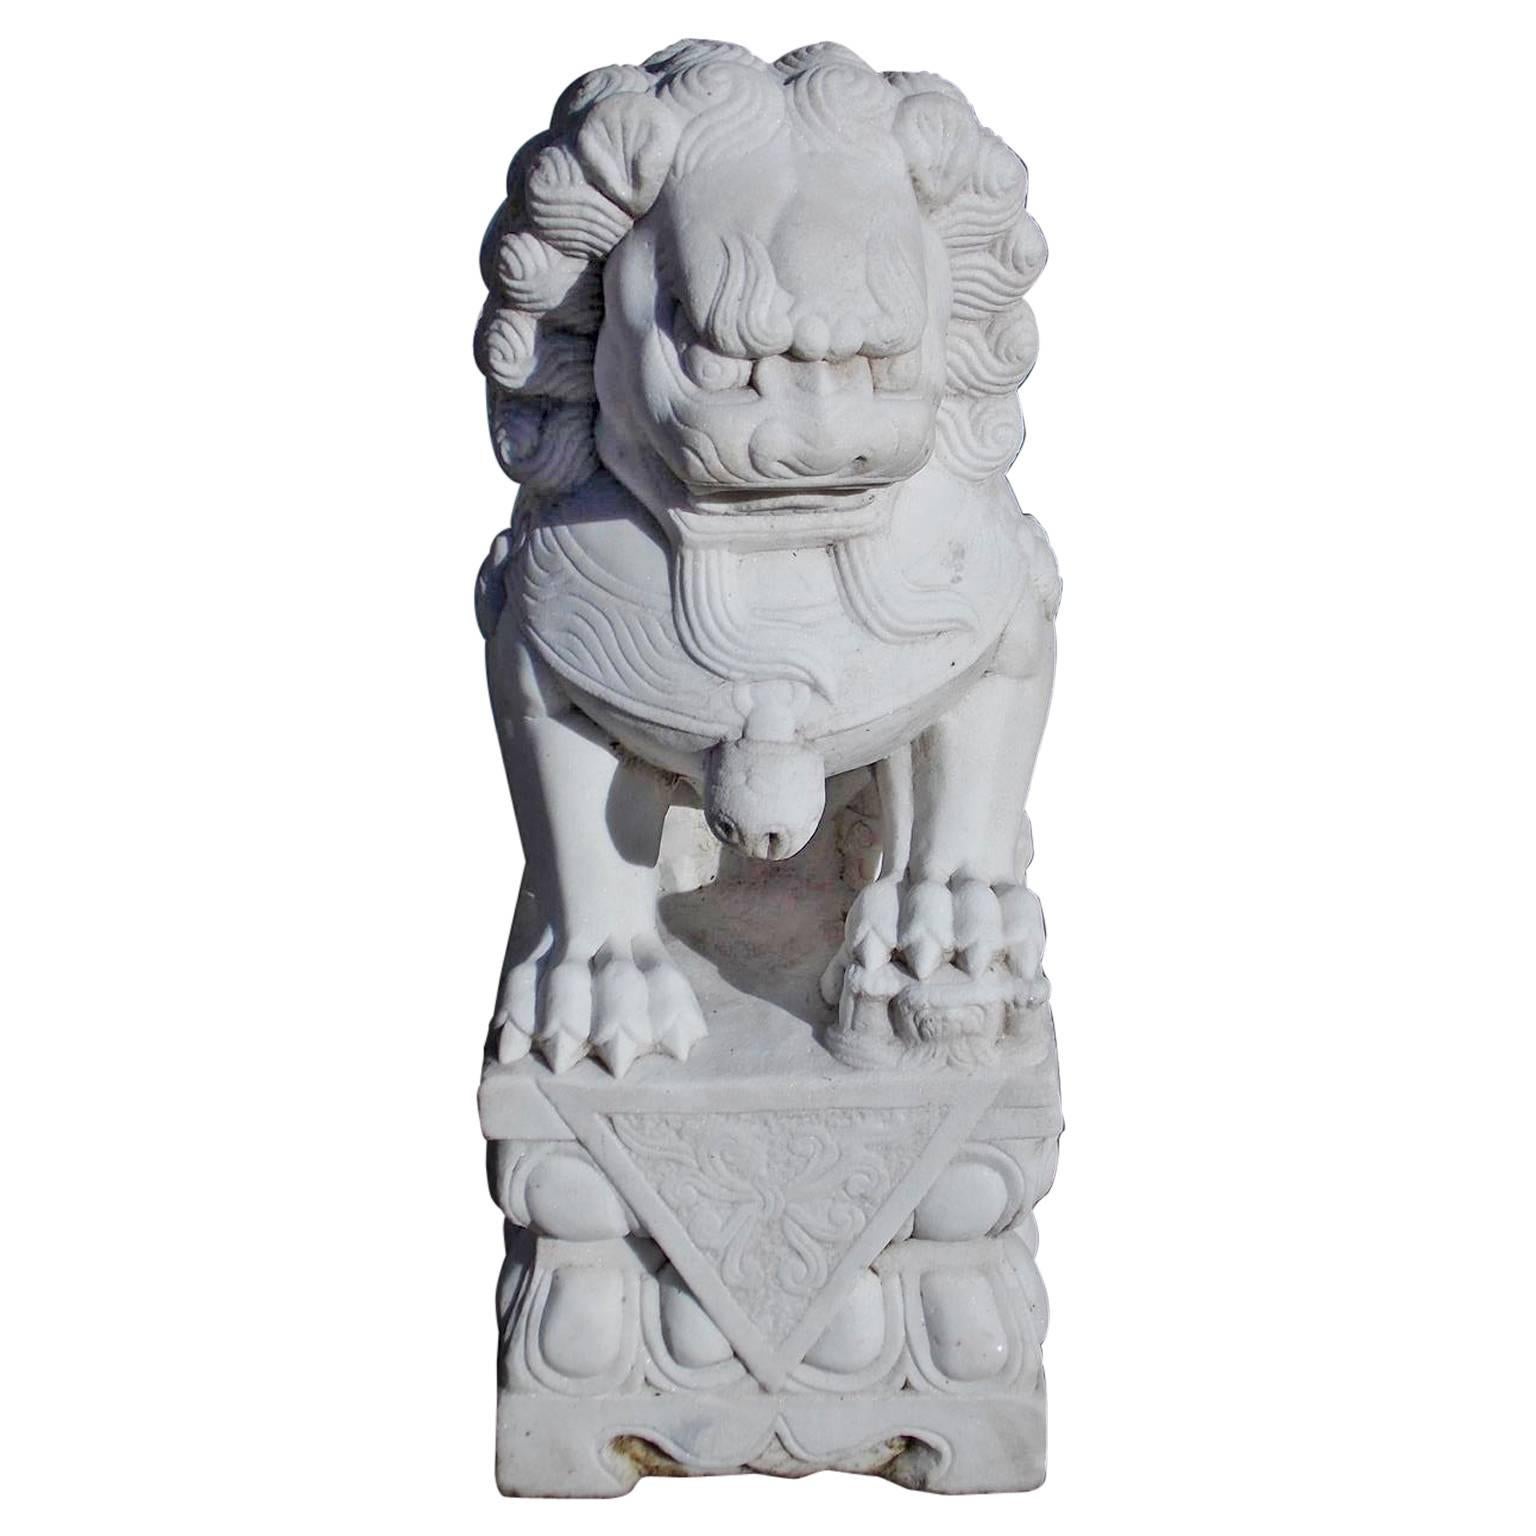 Chinese Marble Foo Dog Resting on Squared Decorative Plinth, 20th Century